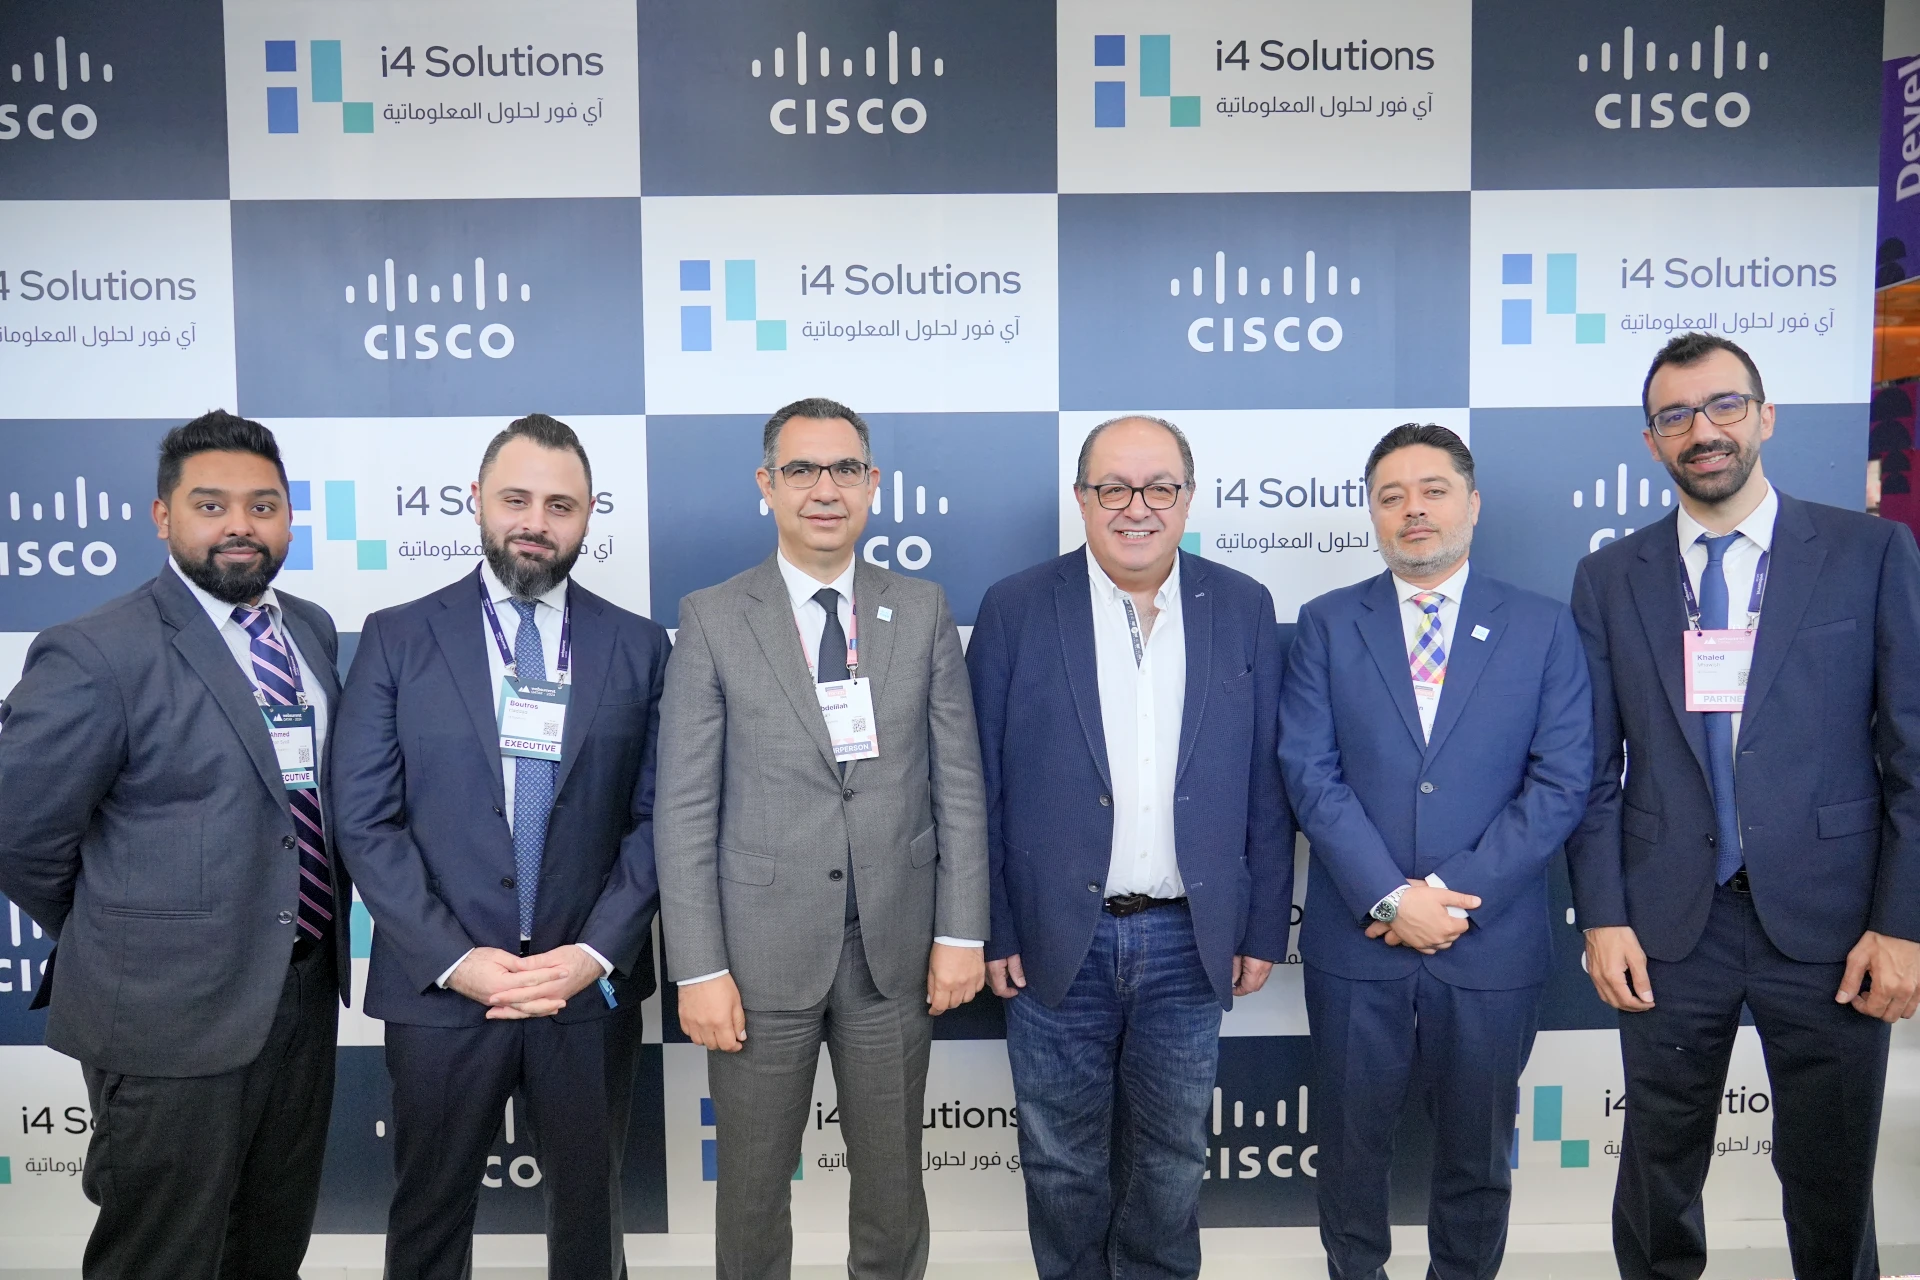 six men in suits are seen in front of a display stand with the i4 and Cisco logos prominent.